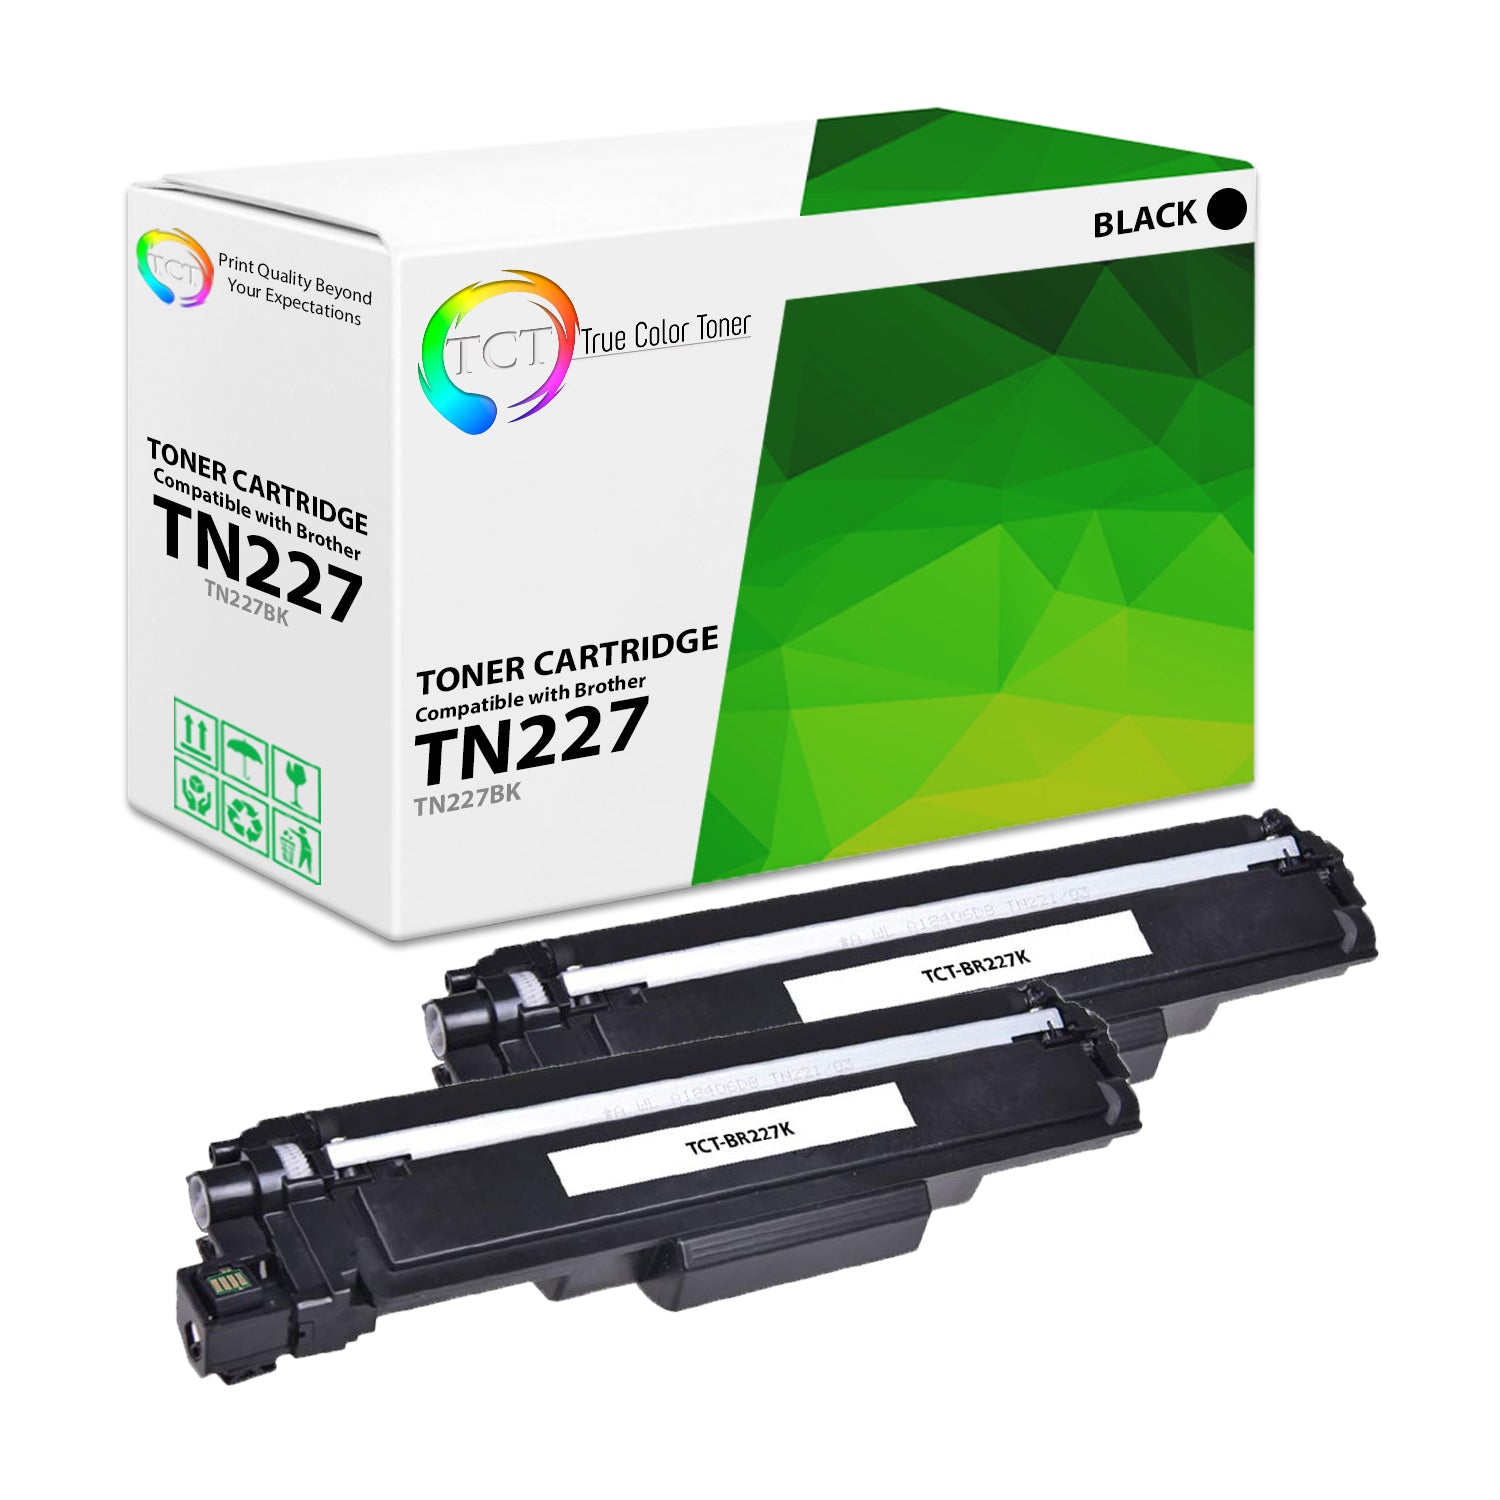 TCT Compatible Toner Cartridge Replacement for the Brother TN227 Series - 2 Pack Black